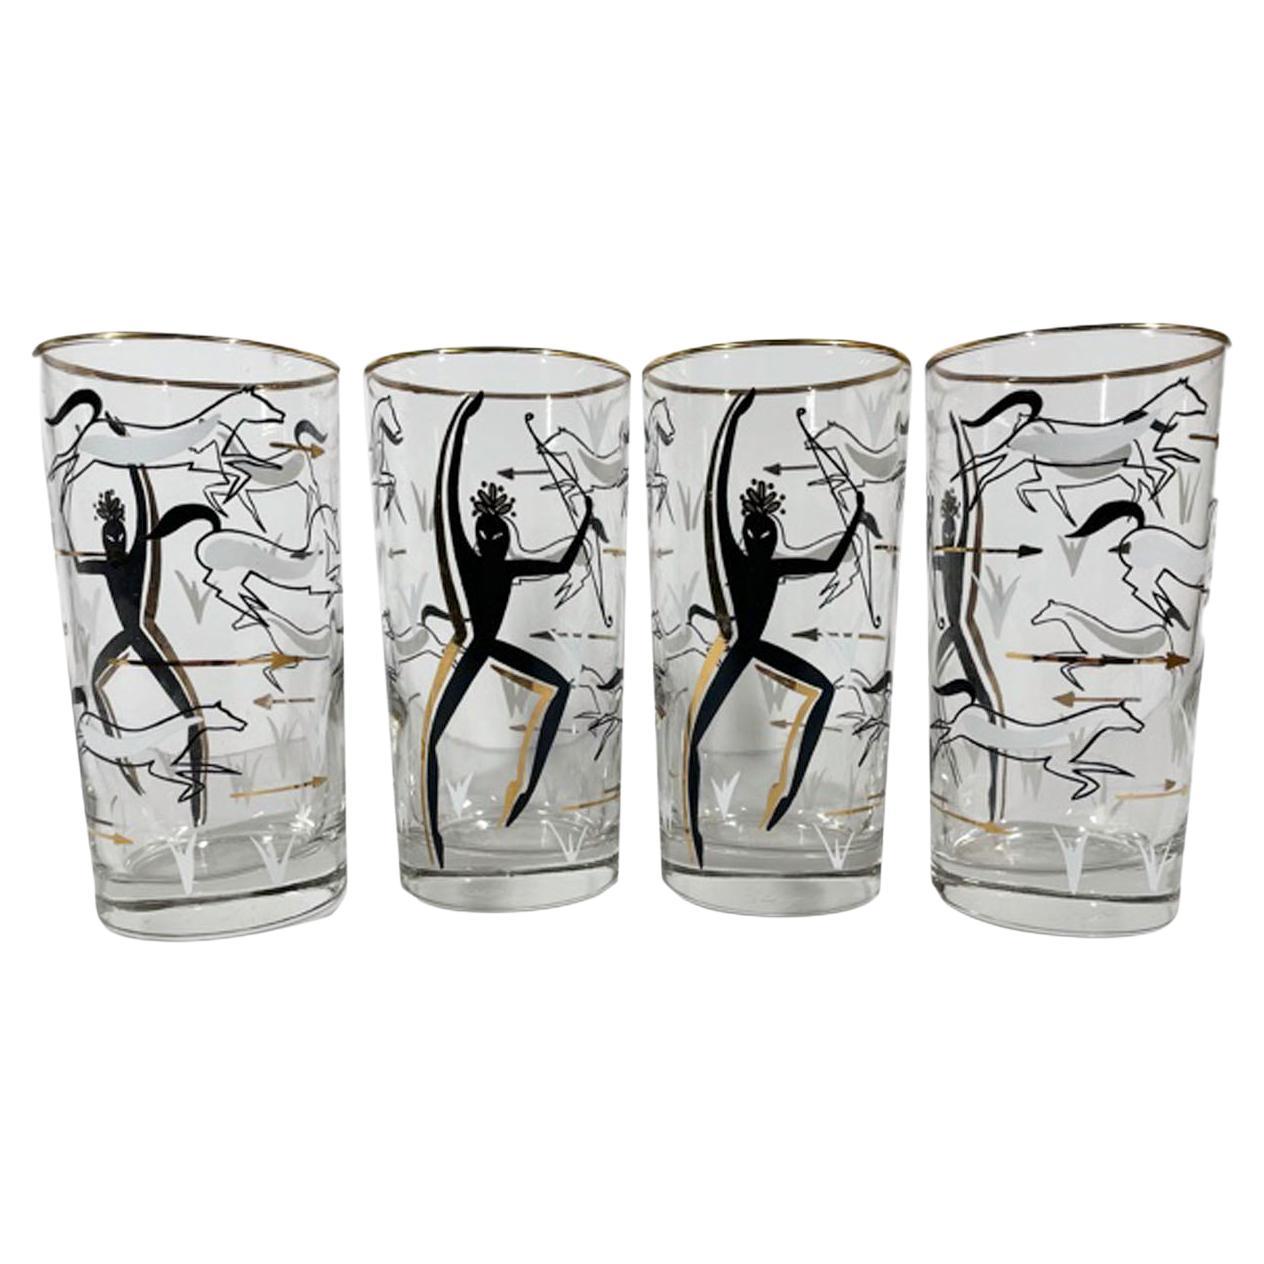 8 Vintage Highball Glasses with Cave Painting Scenes of Hunters & Horses For Sale